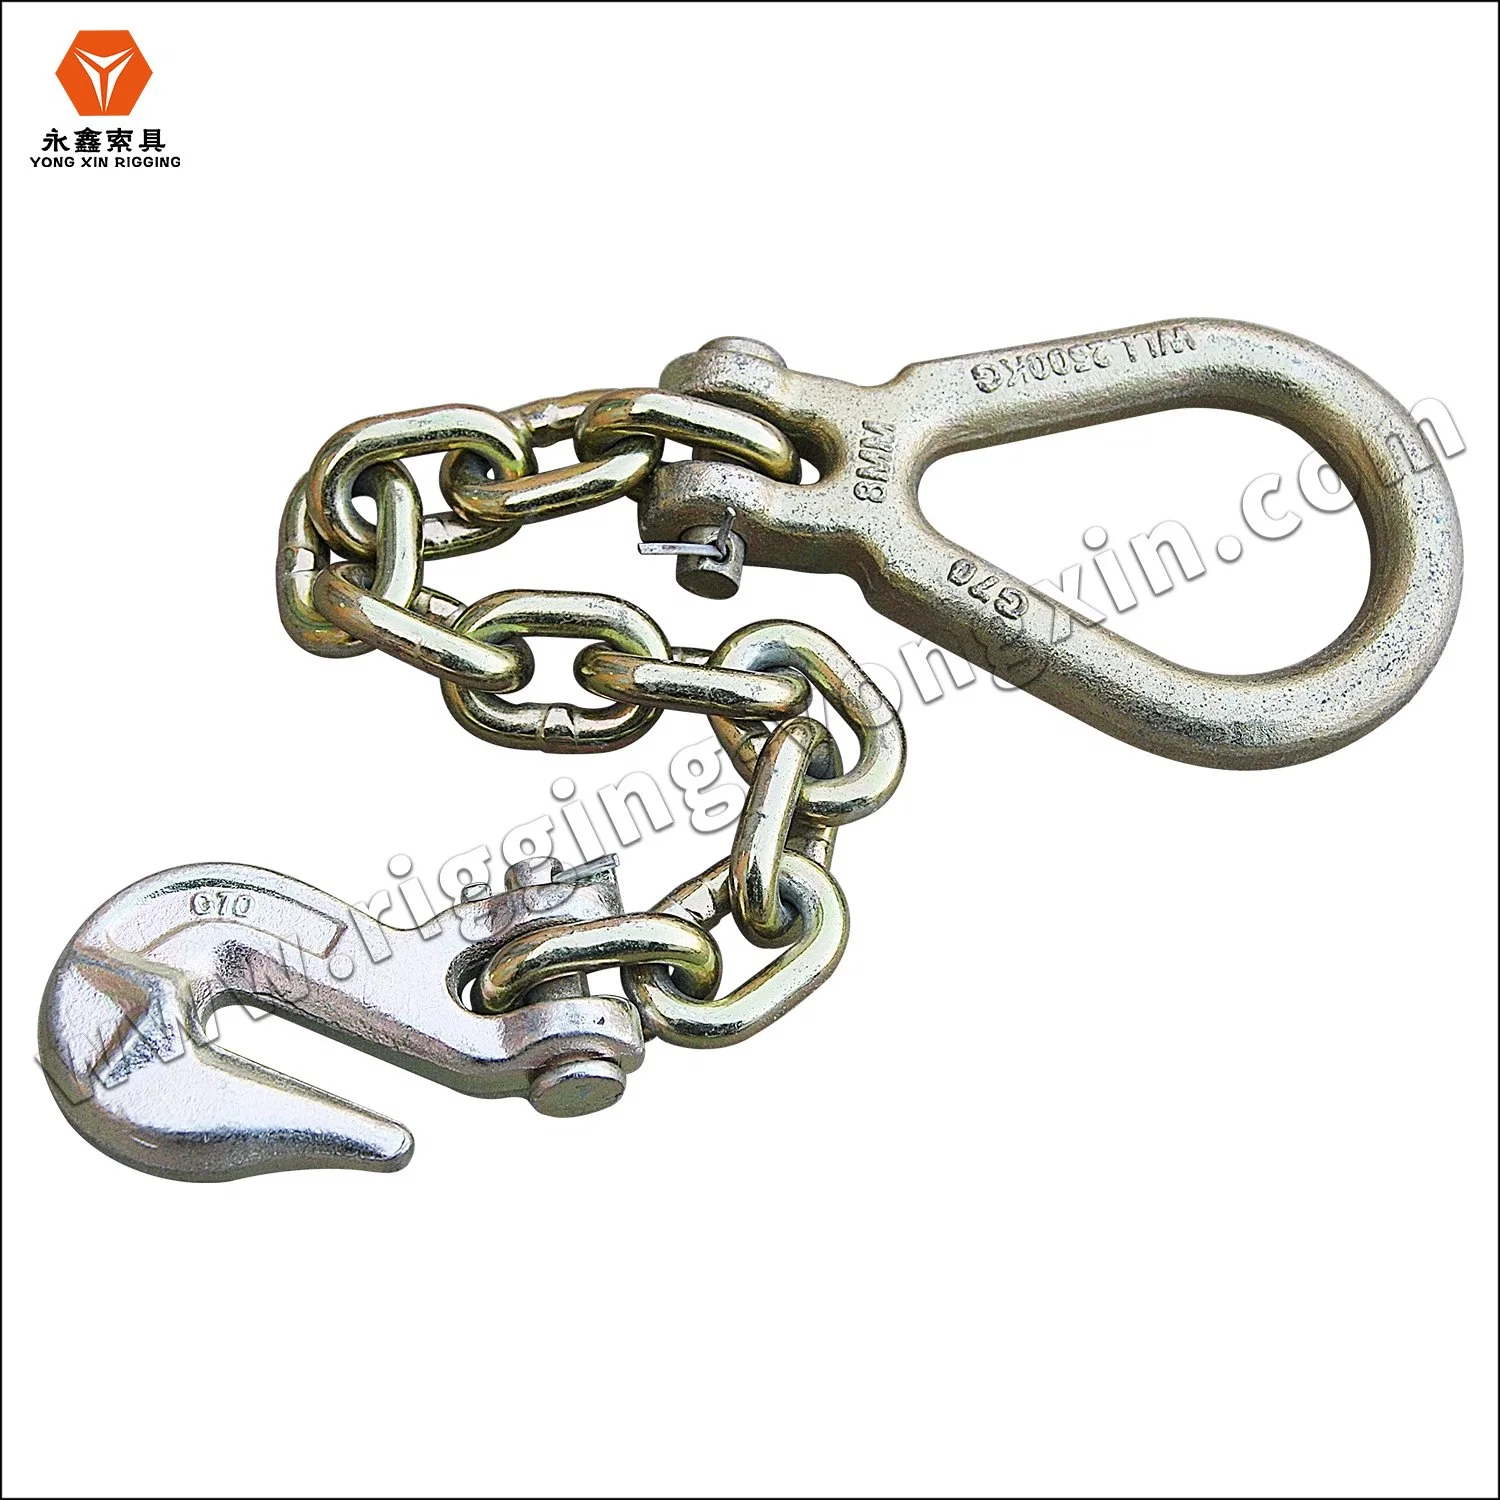 DIN 763 Long Link and DIN 766 Short Link Stainless Steel Chain